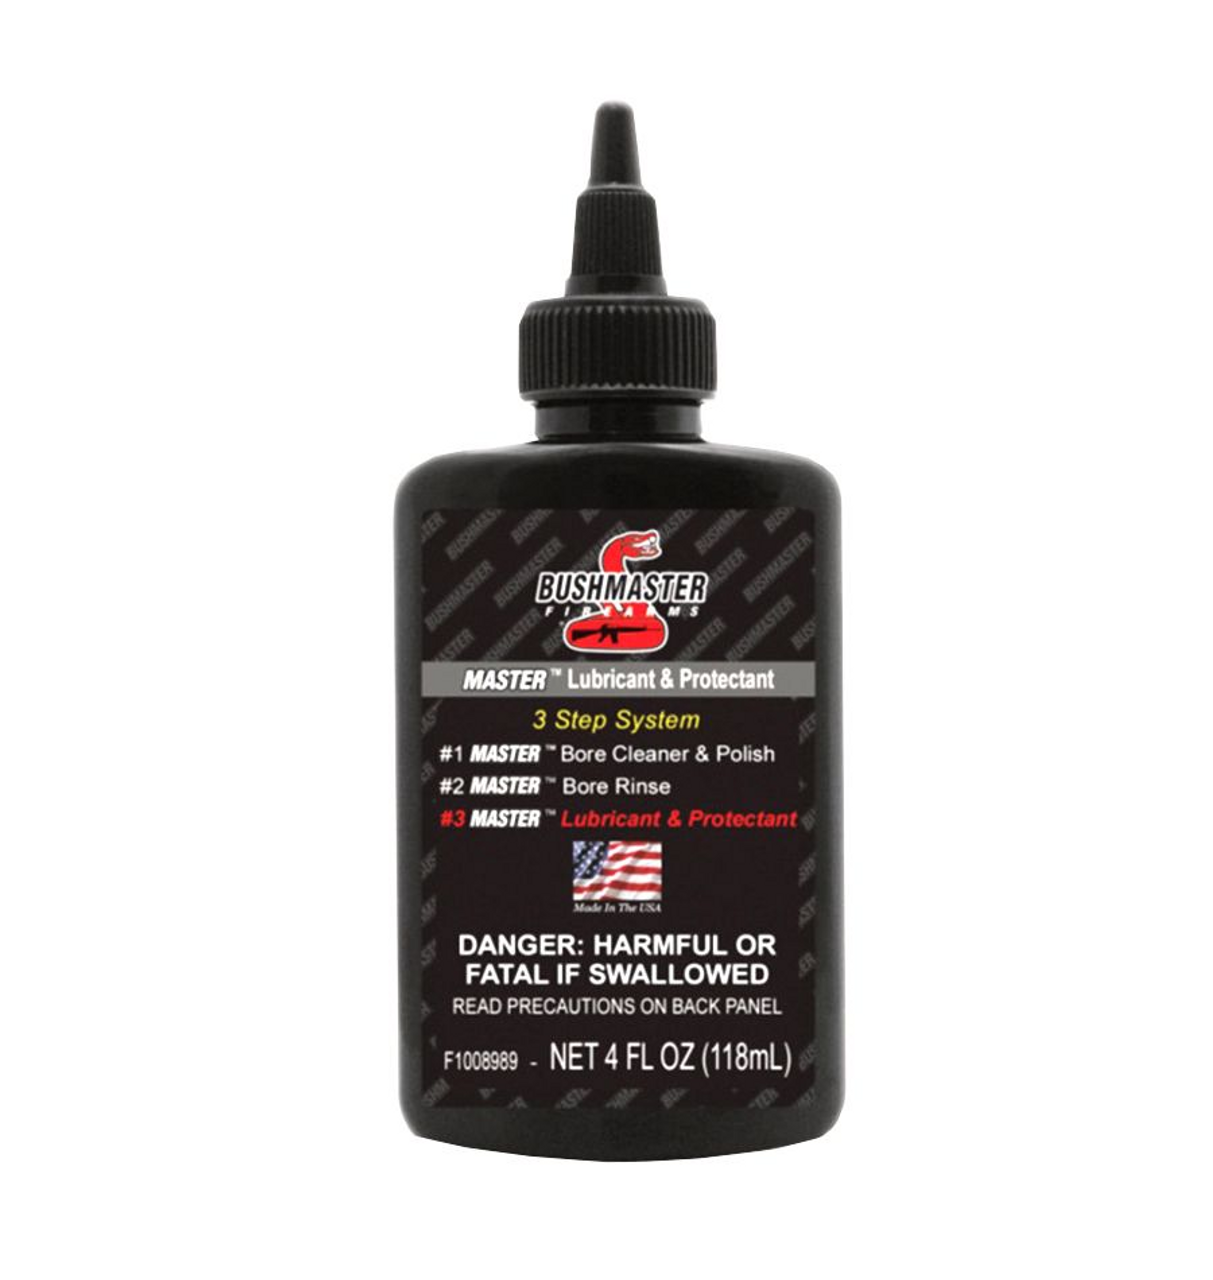 Bushmaster Master Lubricant and Protectant, 4 Oz